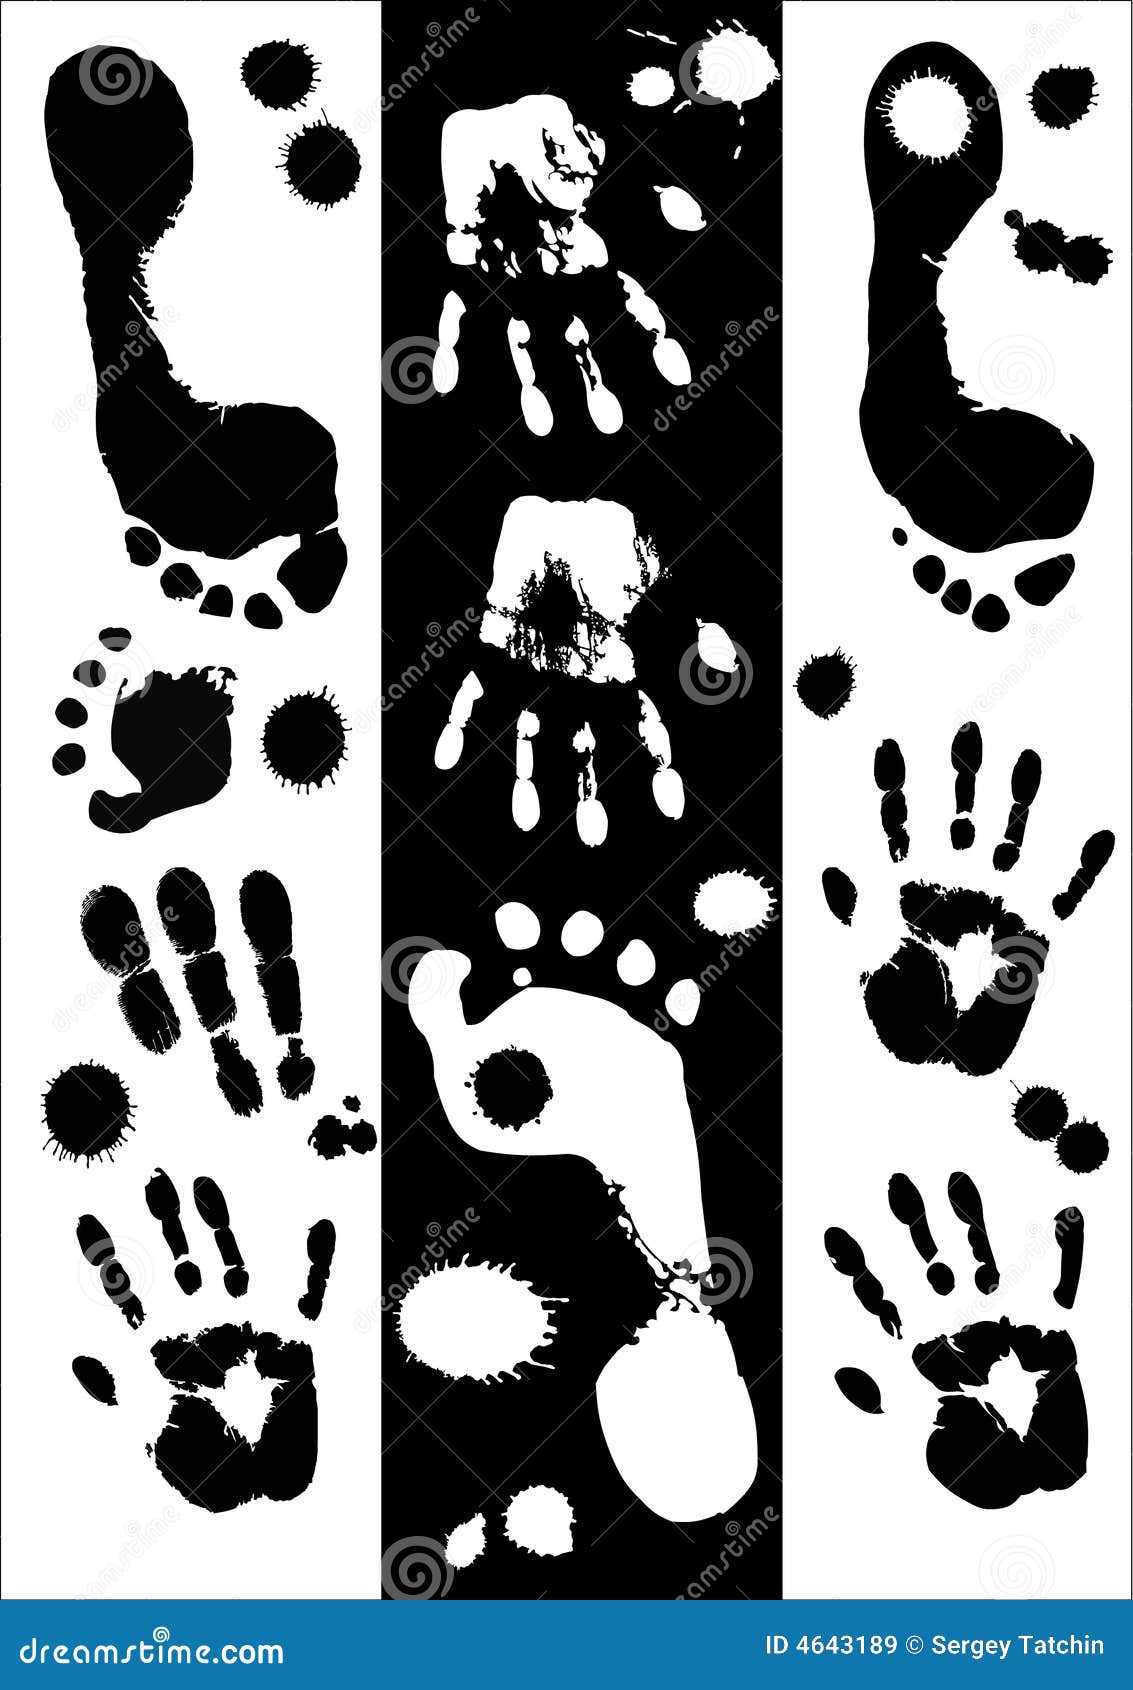 imprints of hands and foots